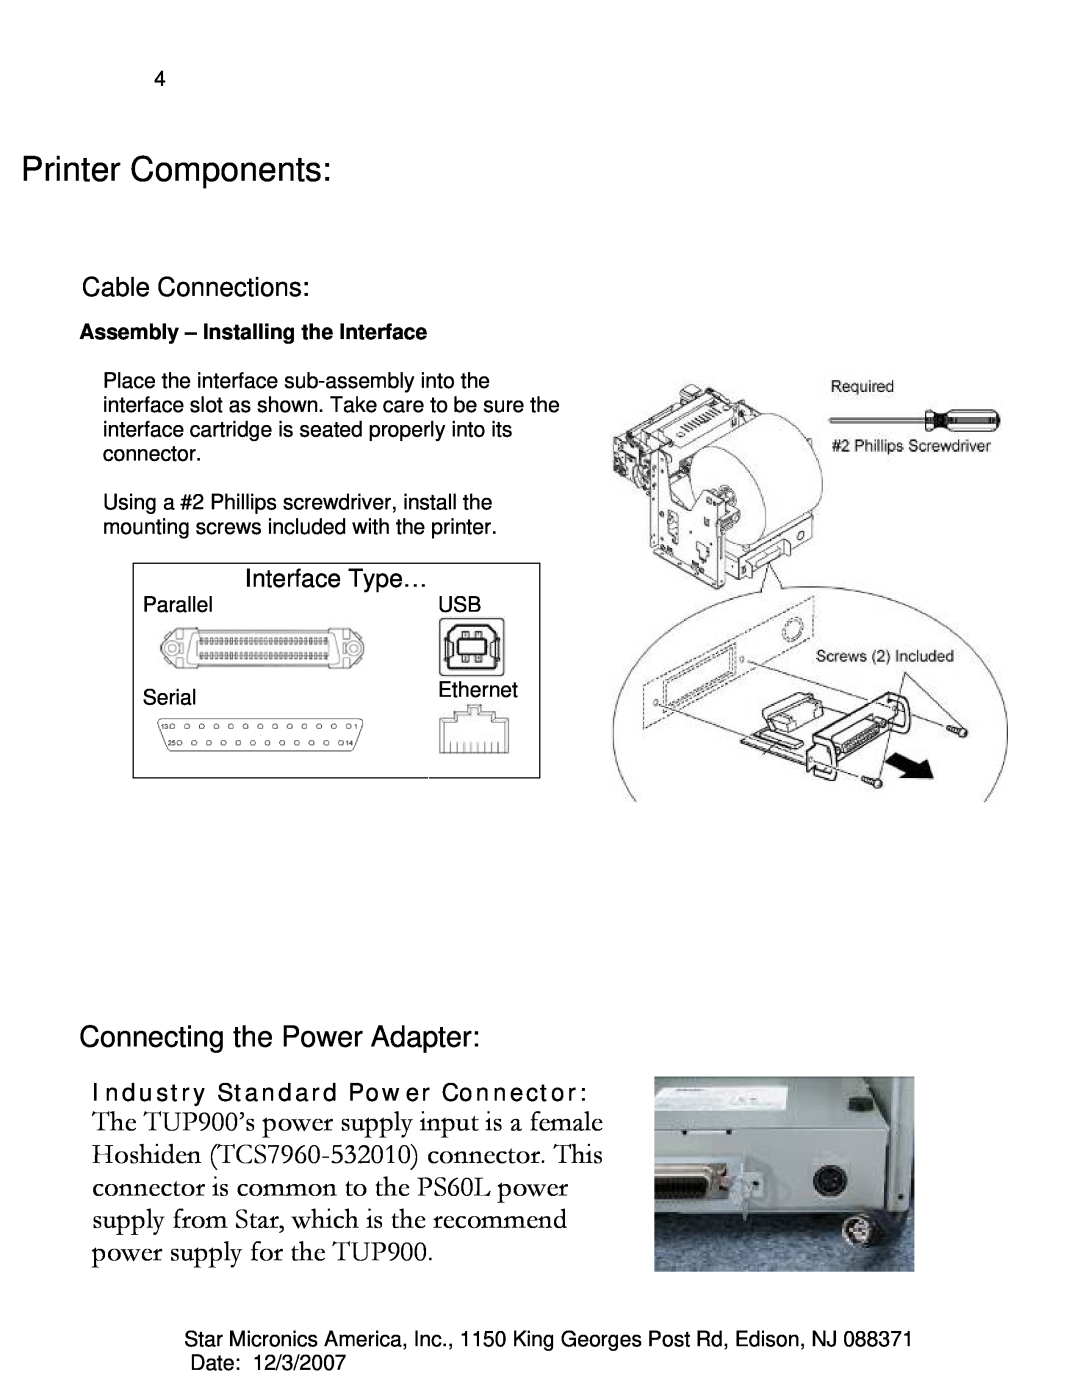 Star Micronics TUP942, TUP992 Cable Connections, Interface Type…, Assembly - Installing the Interface, Printer Components 